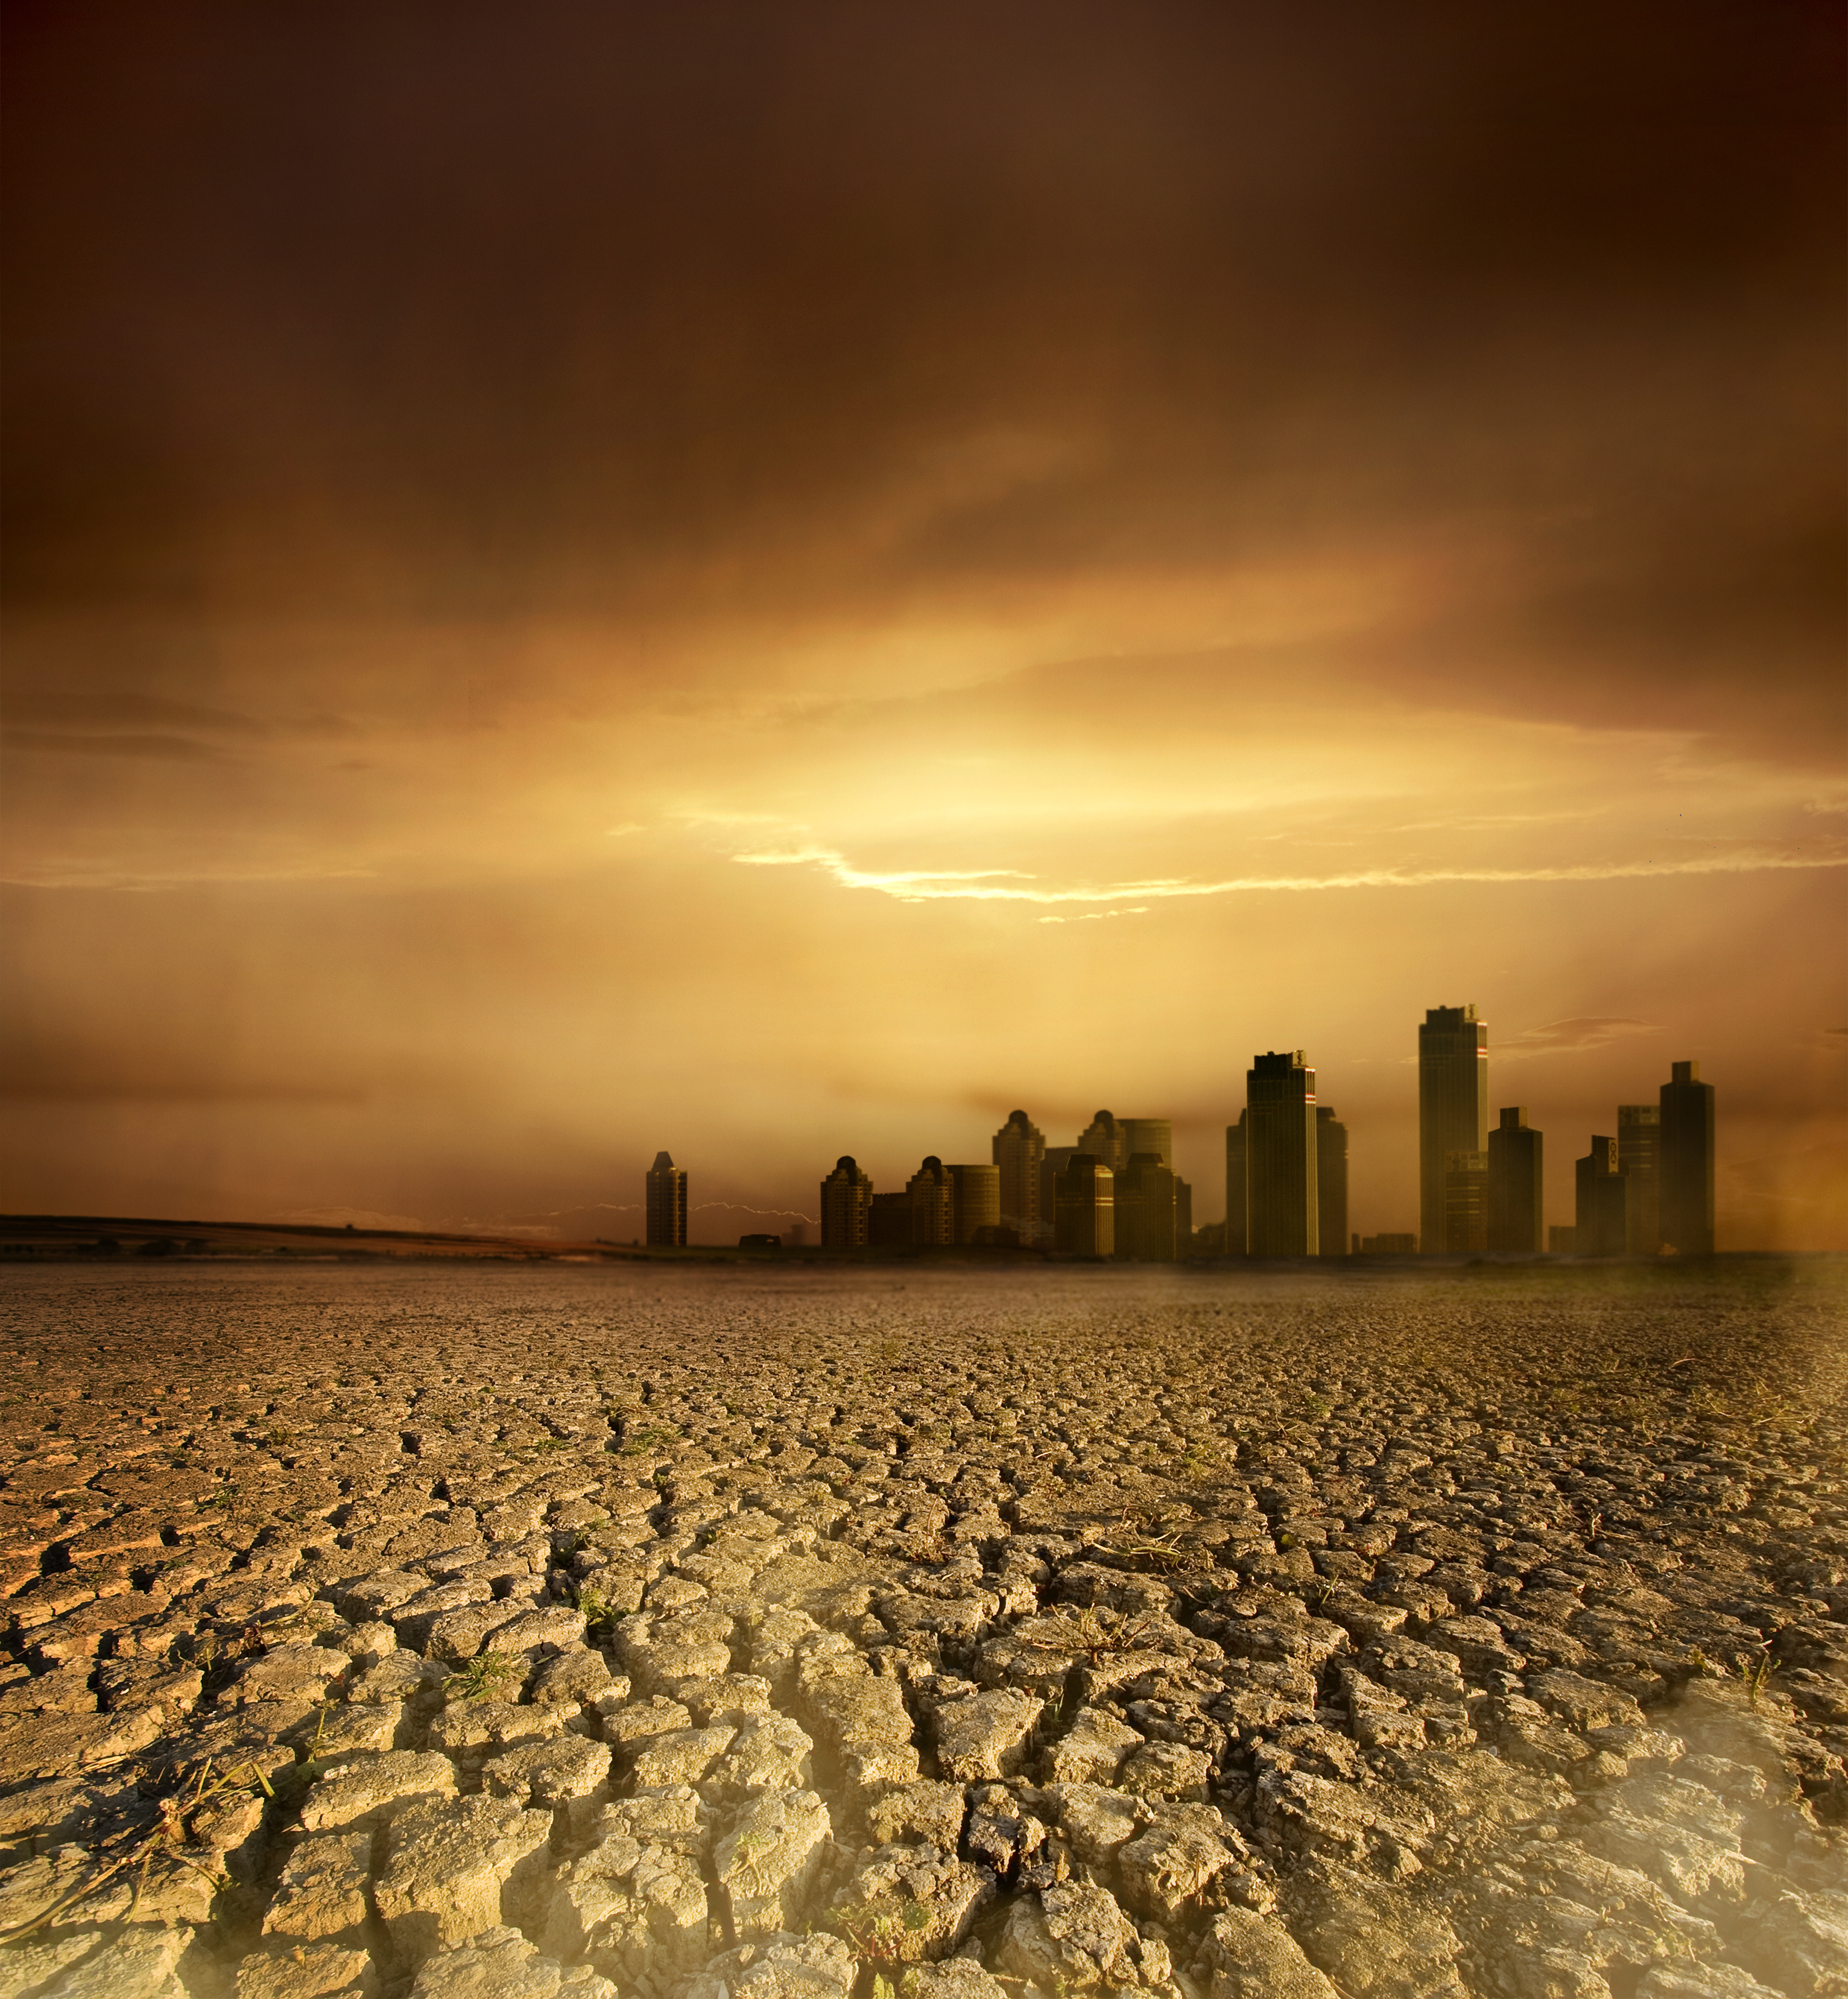 Global Warming and pollution theme with cracked land and the cityscape